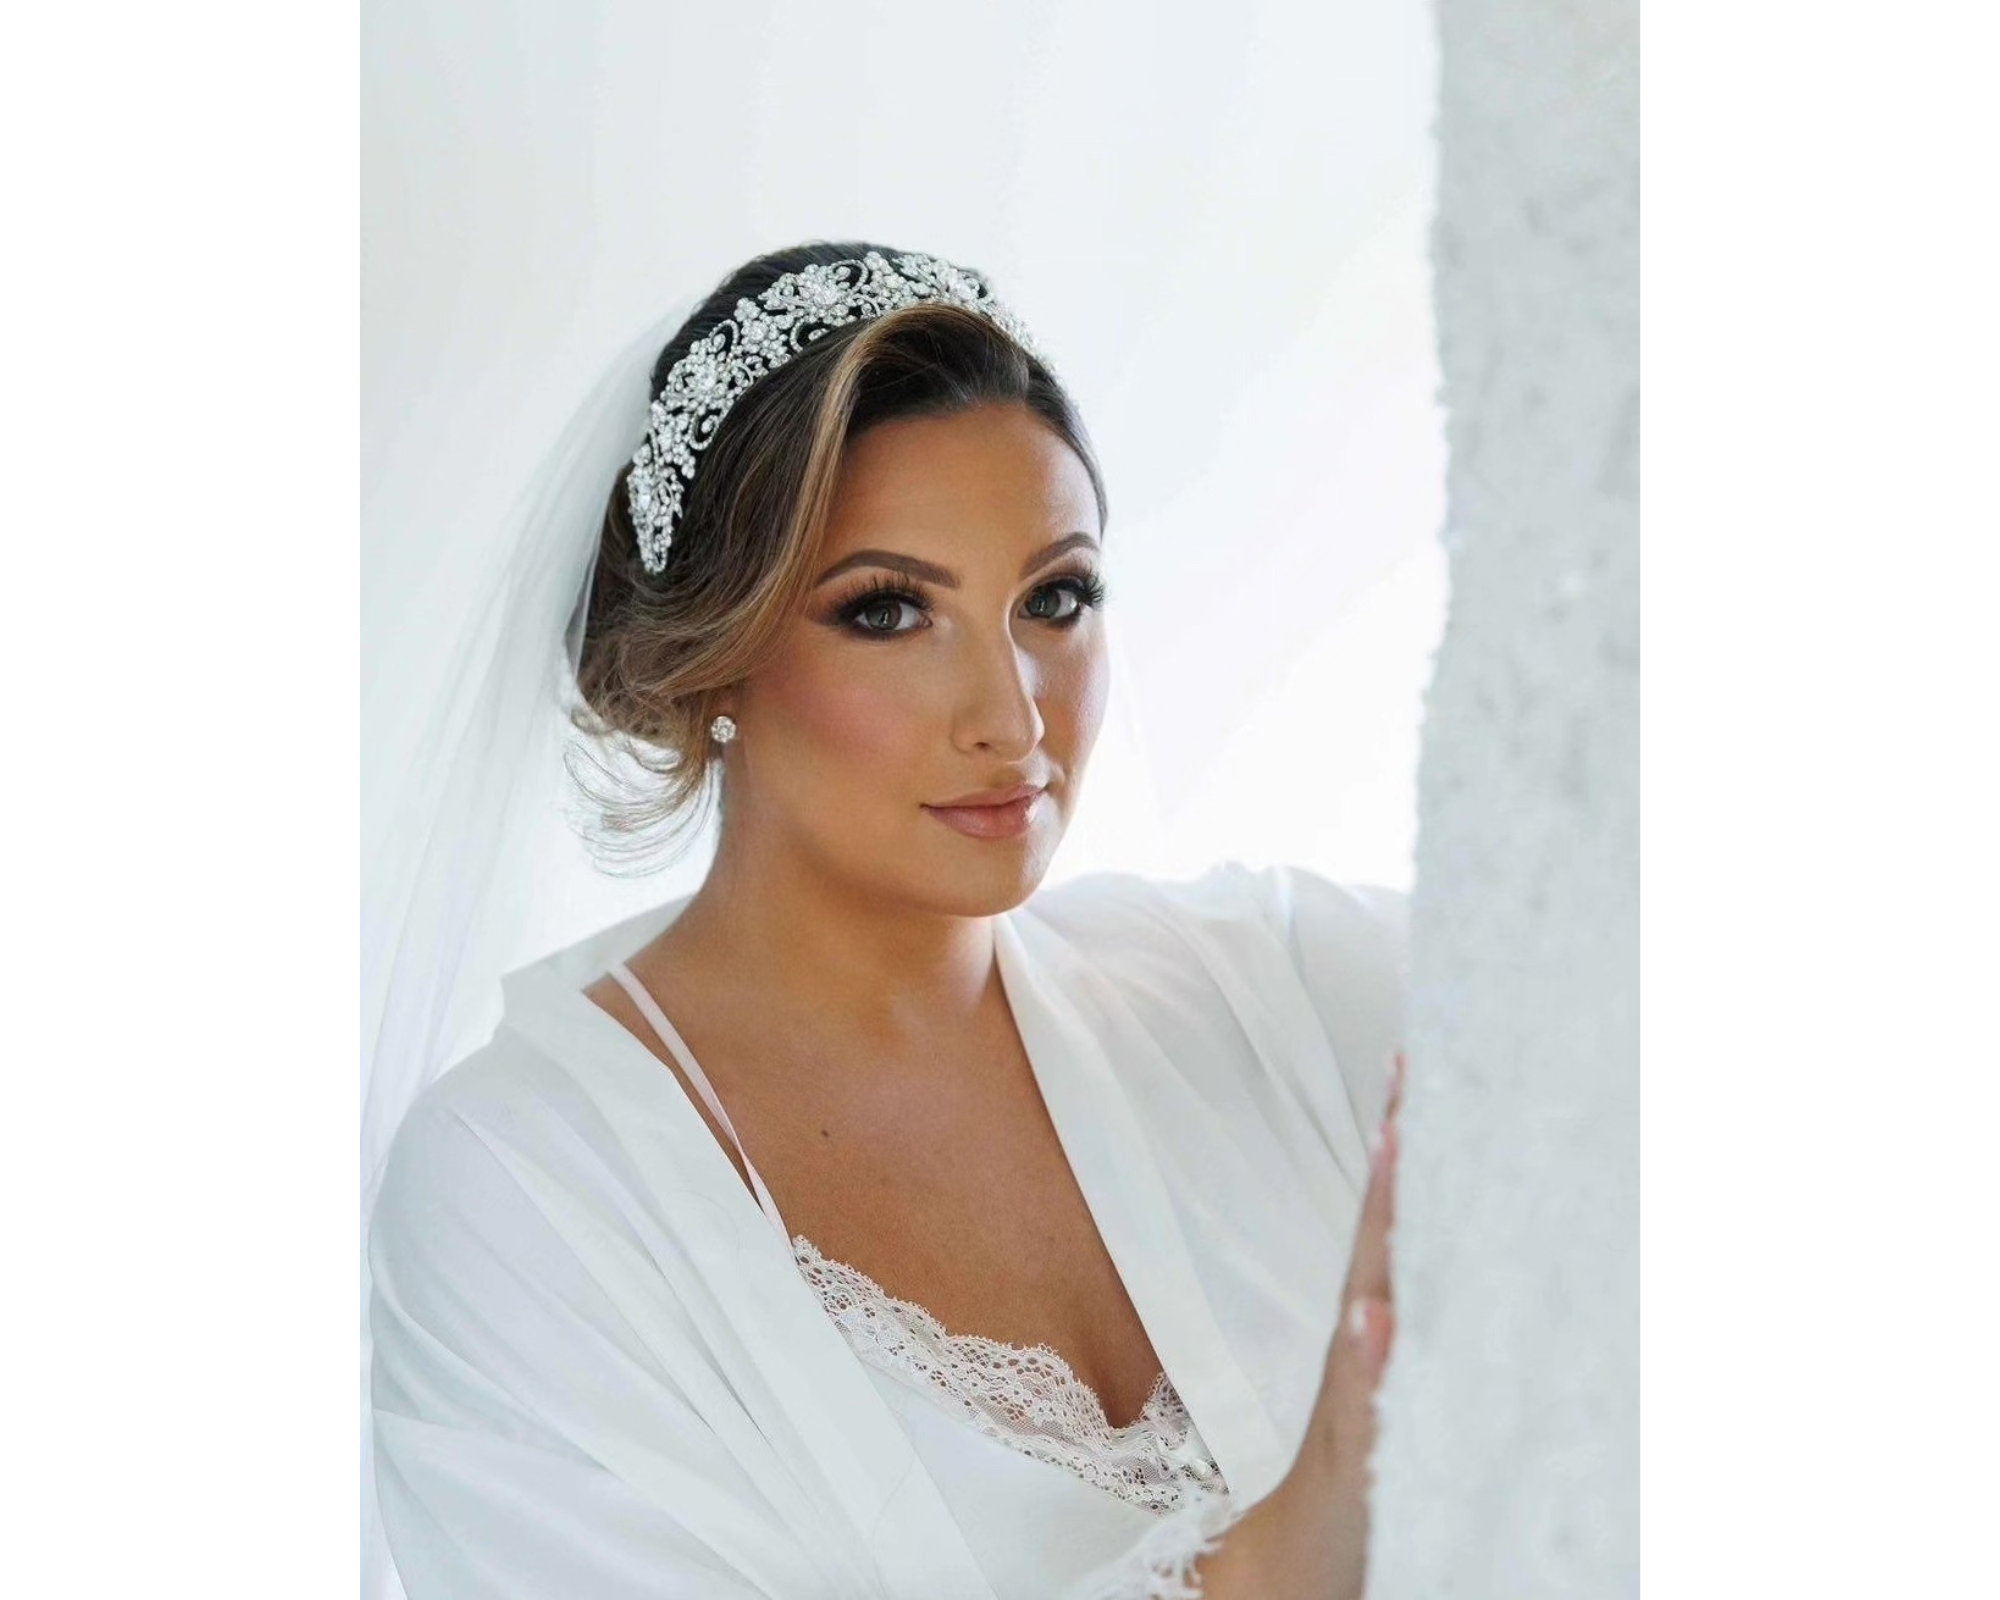 Beautiful bride Brittany getting ready for her day. She's wearing her Swarovski crystal headband from Bridal Styles Boutique.